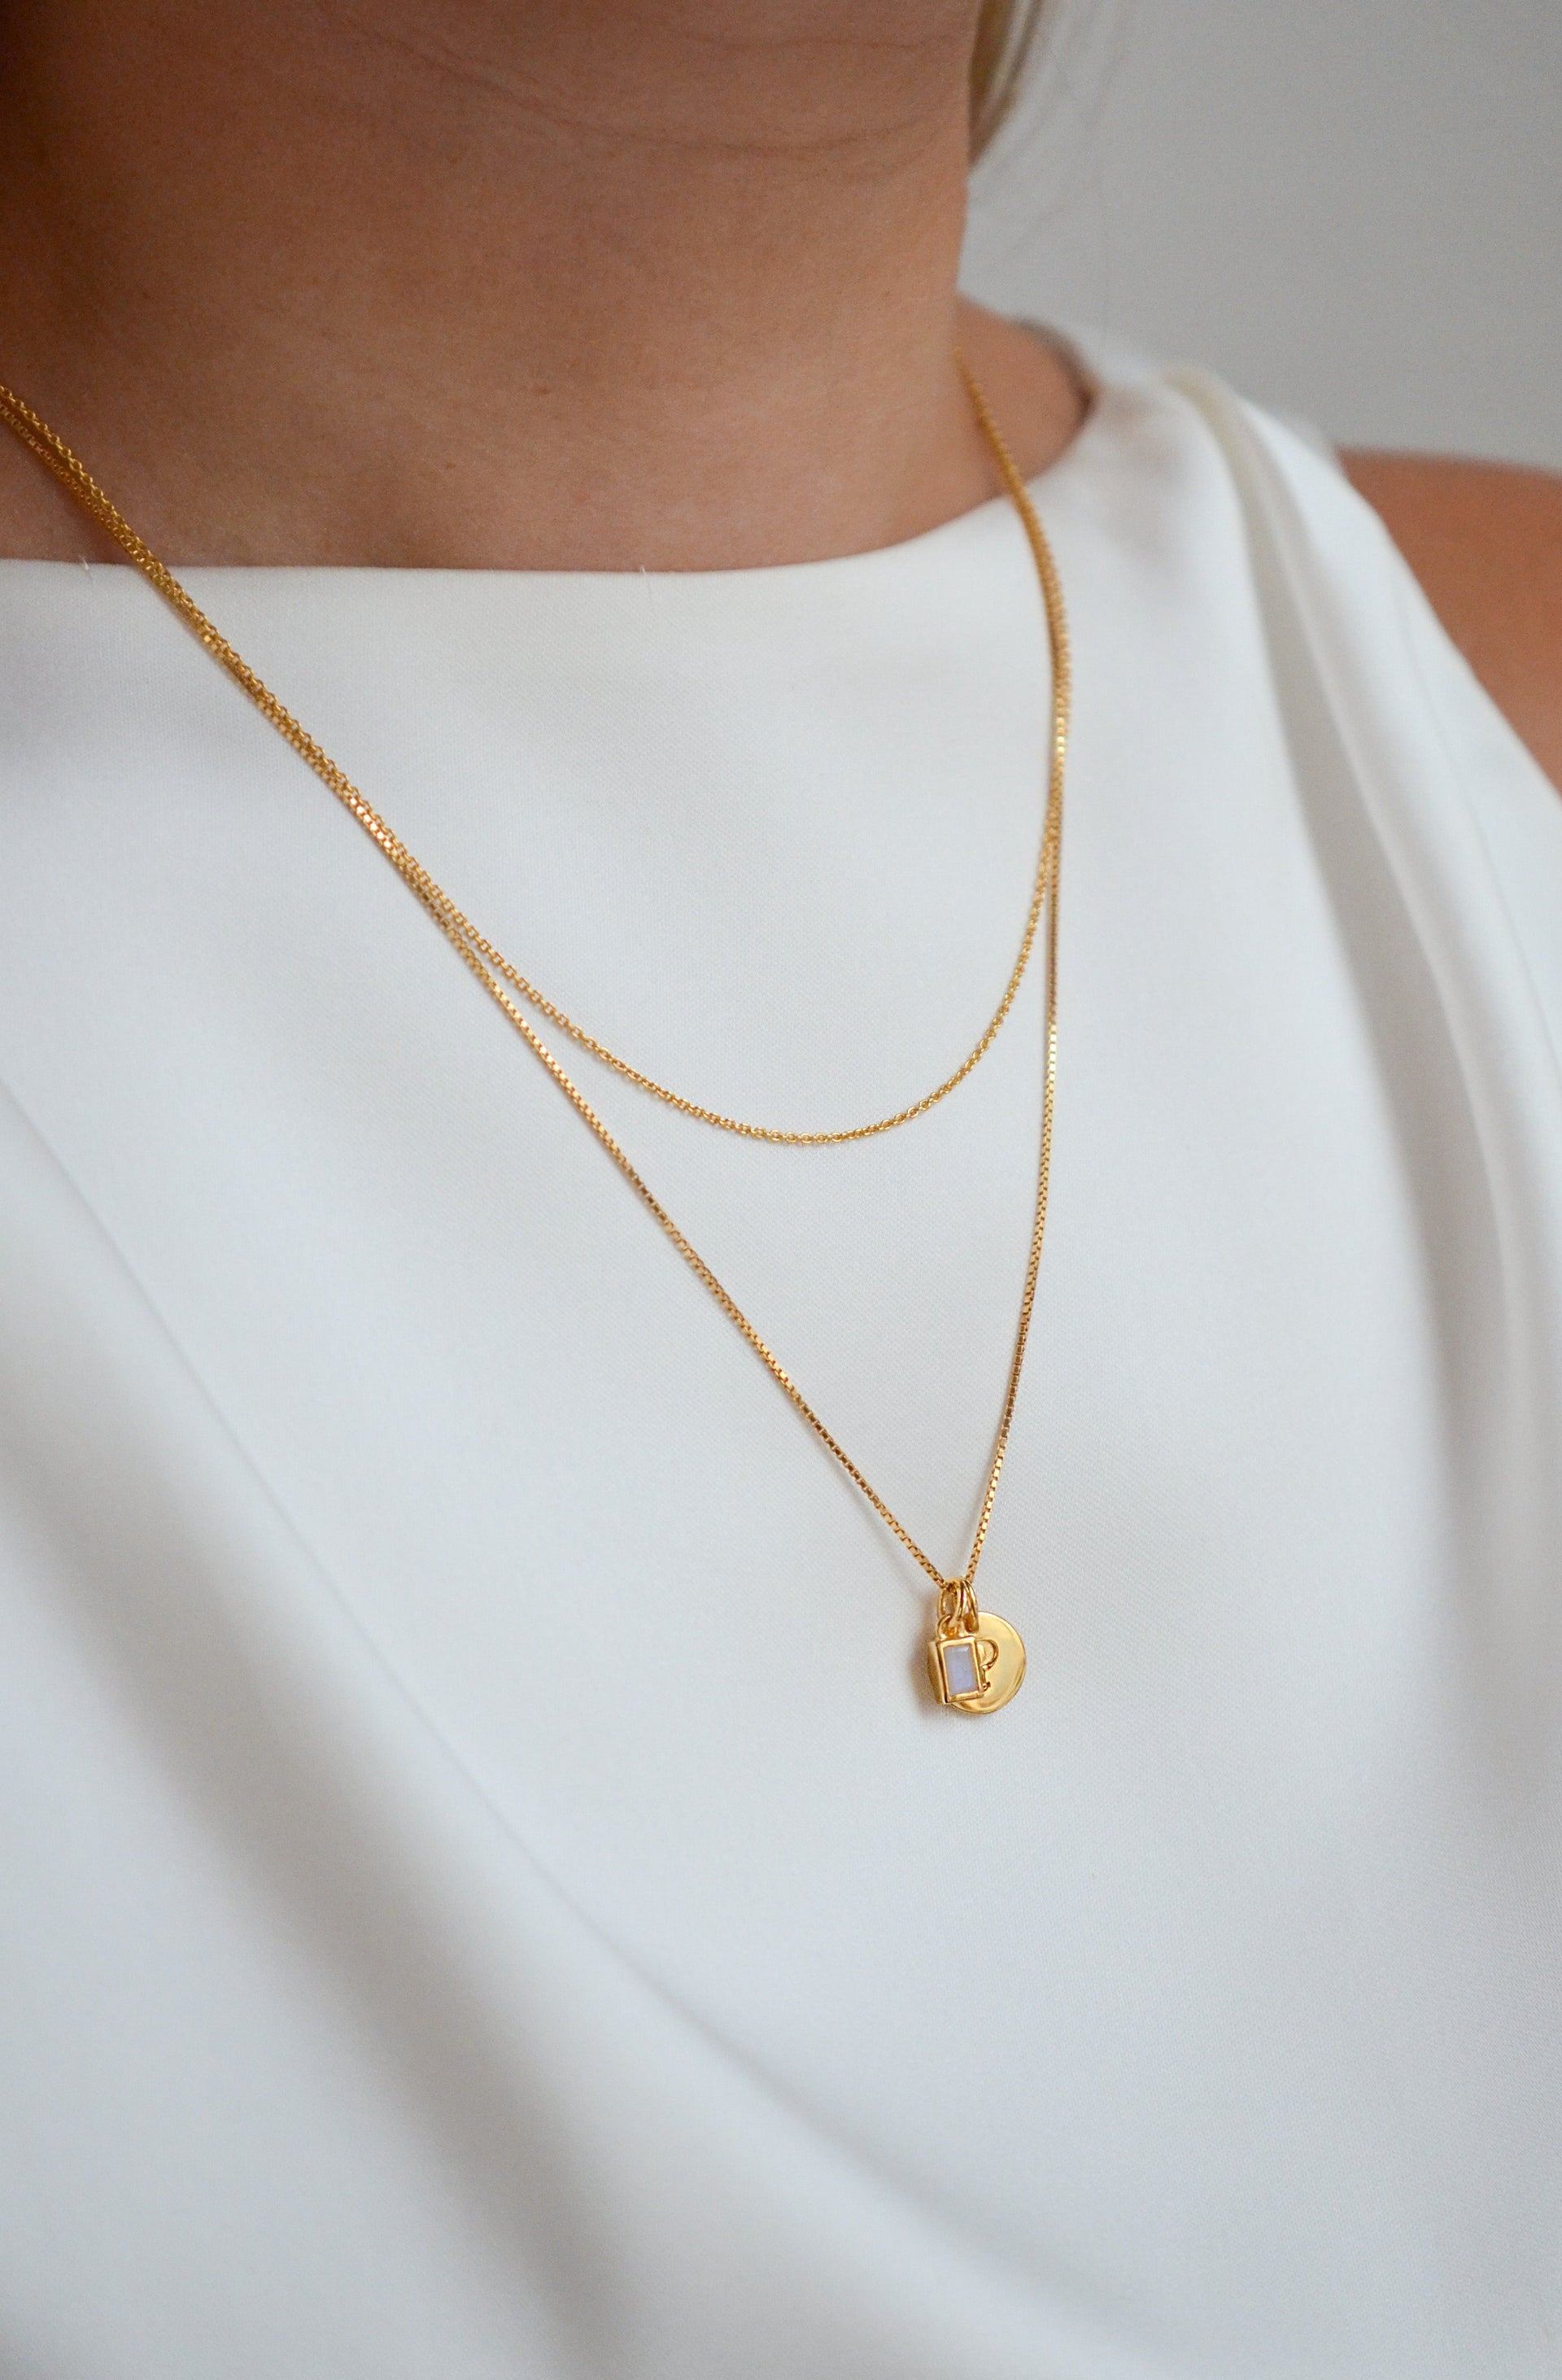 Gold necklaces with letter pendants